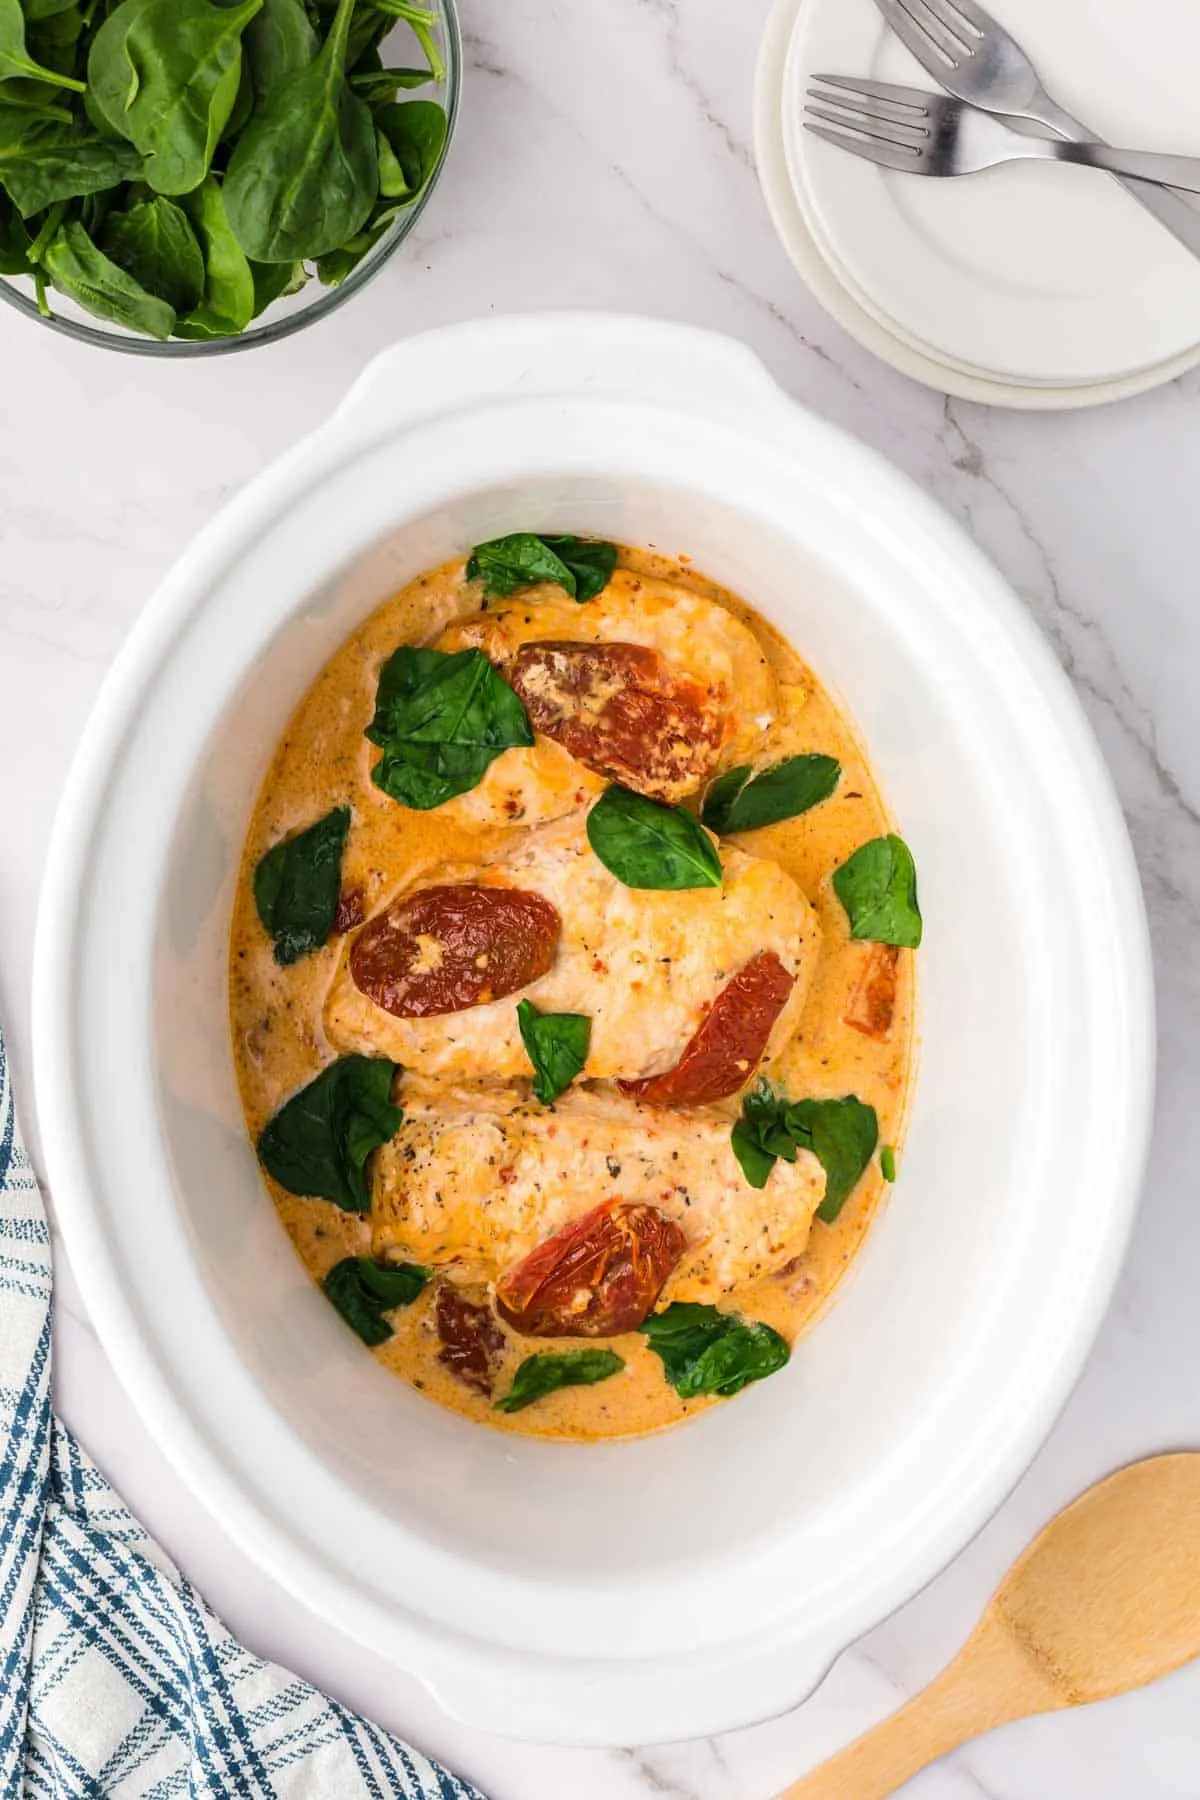 Crock Pot Tuscan Chicken is an easy slow cooker chicken dinner recipe made with boneless, skinless chicken breasts and loaded with spinach, sundried tomatoes, cream of chicken soup, tomato sauce and parmesan cheese.